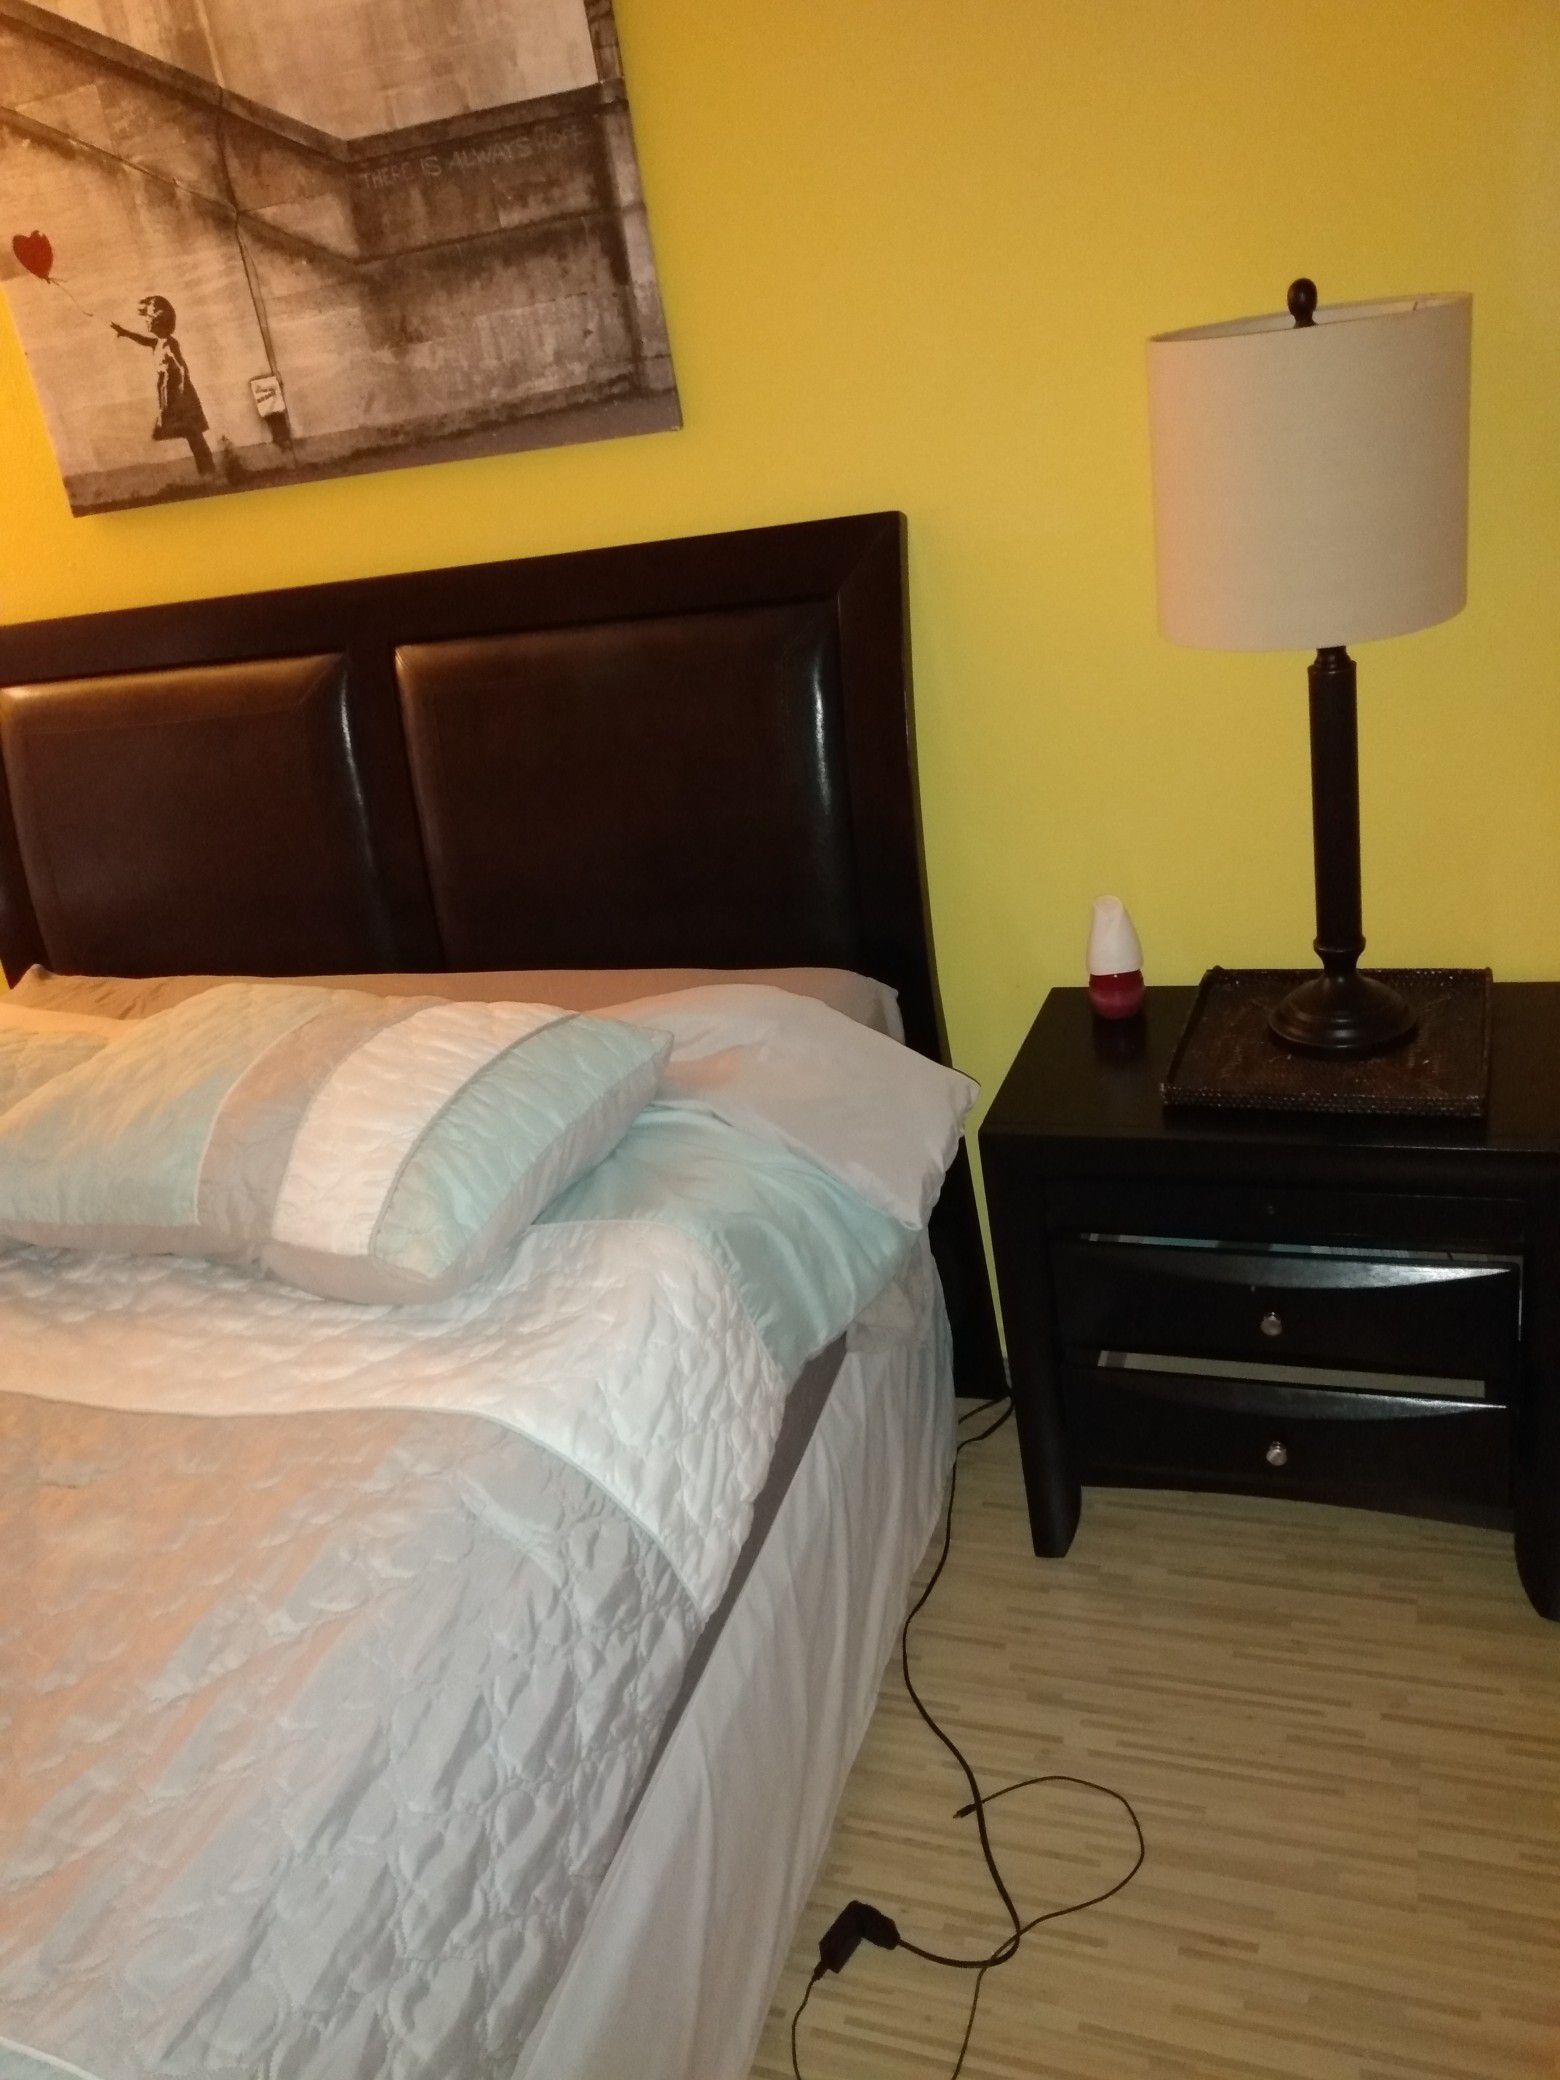 QUEEN SIZE BED W/REAL LEATHER BACKBOARD NIGHTSTAND